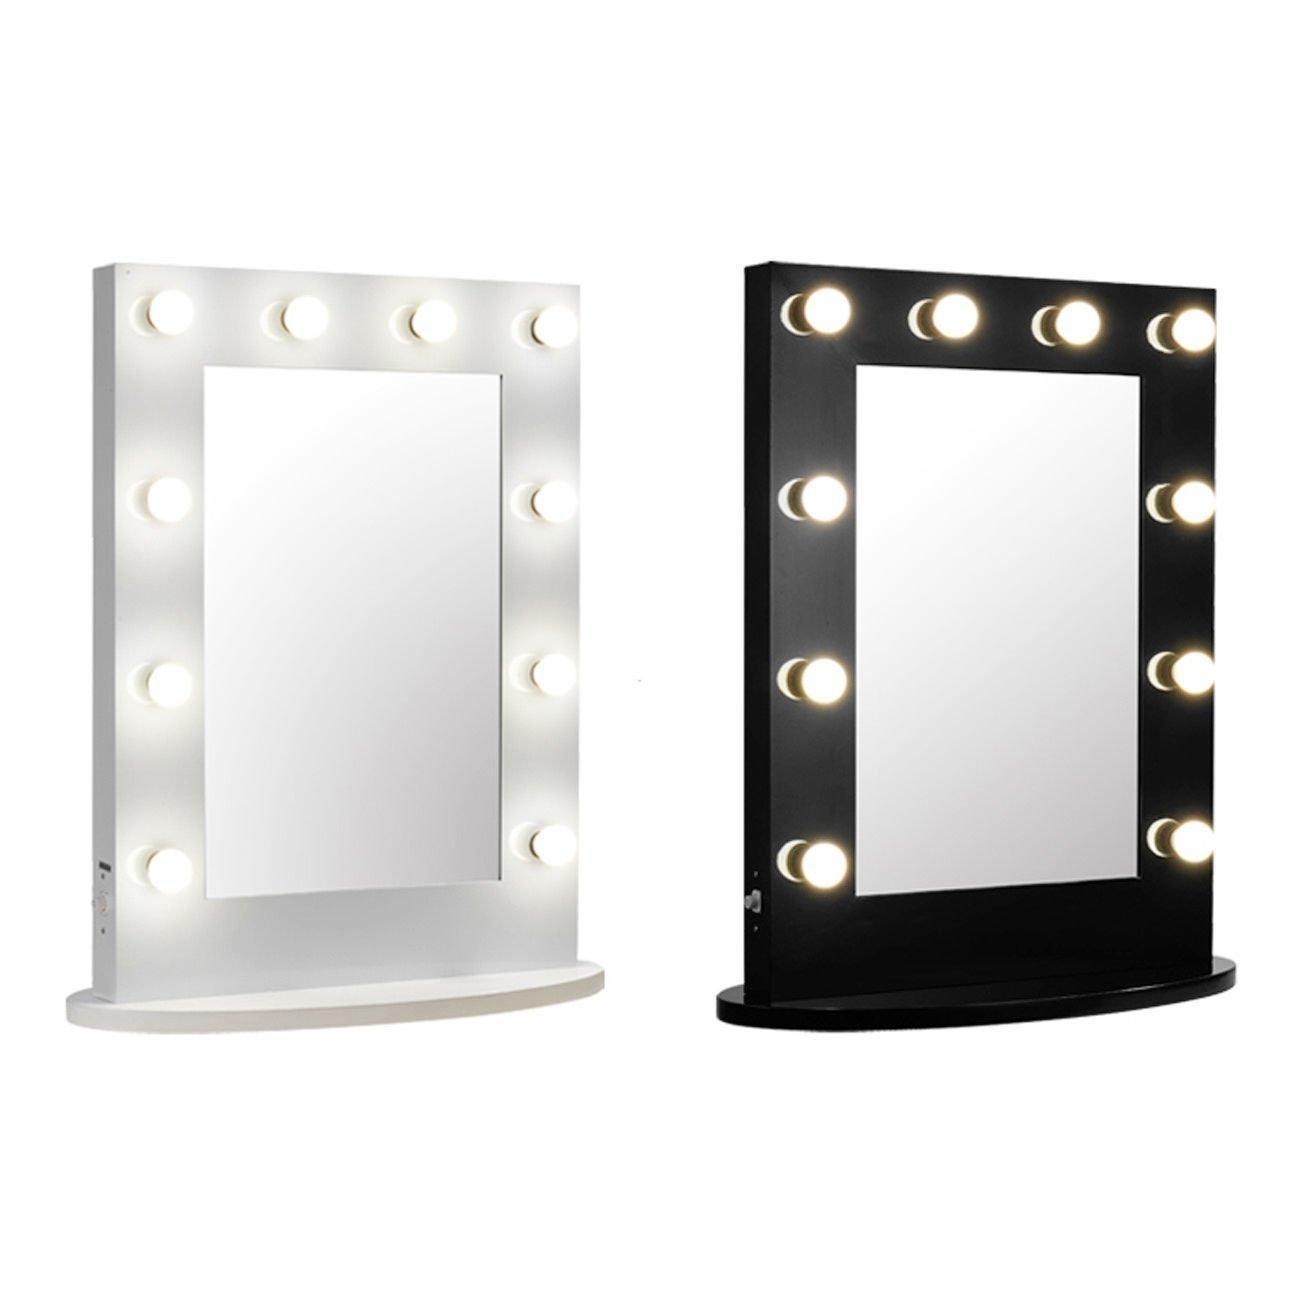 LED Lighted Bathroom Round Mirror Easy Installation Anti-Fog Wall Mounted Makeup Mirror with Lights China Supplier - China Wall Mirror, Bathroom Mirror | Made-in-China.com